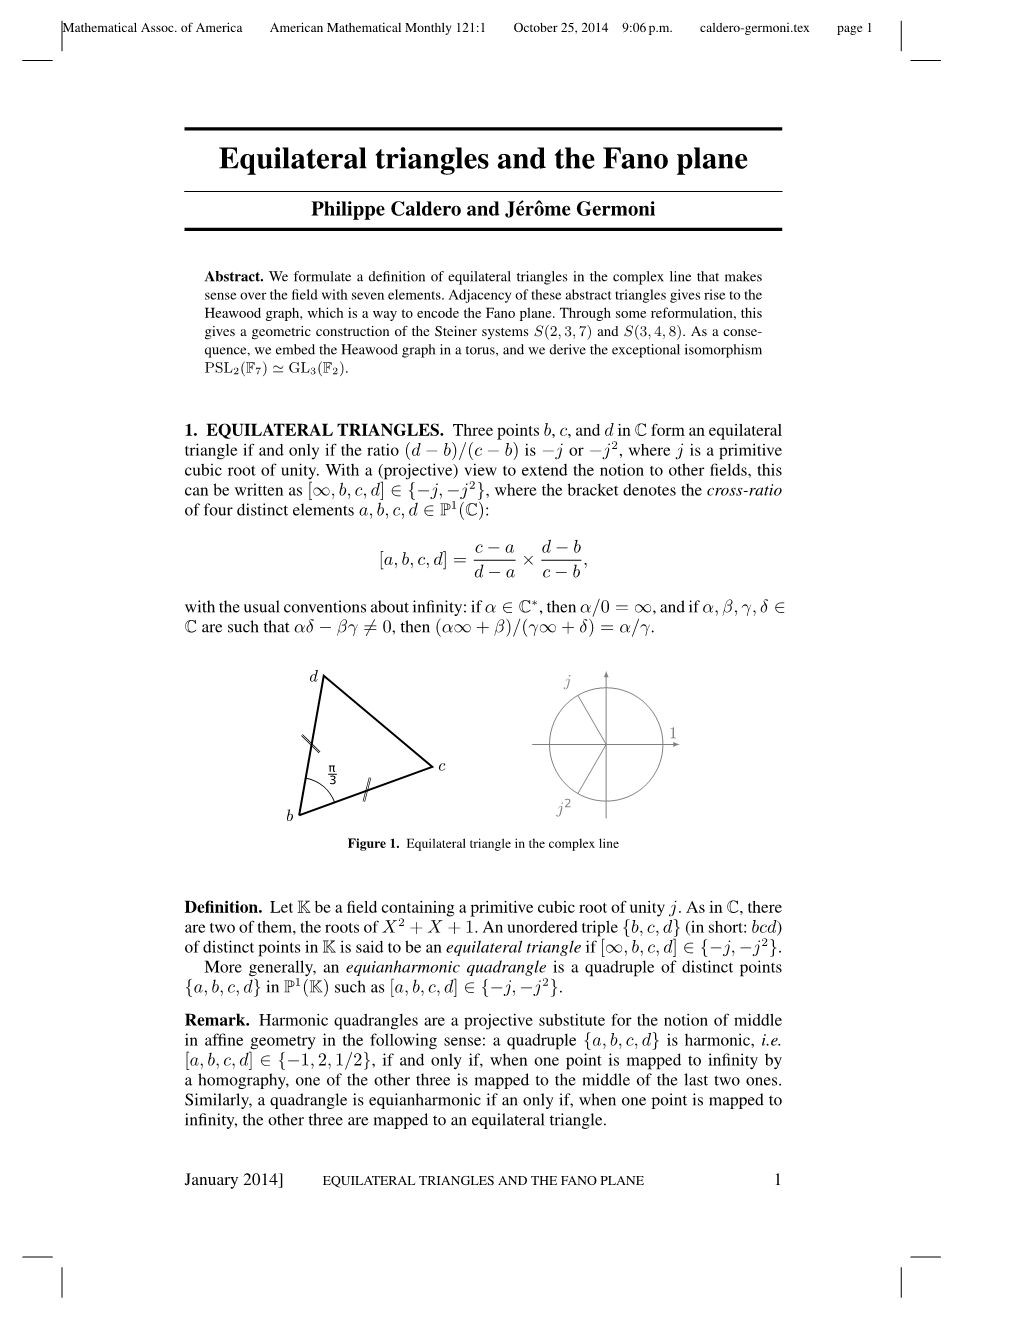 Equilateral Triangles and the Fano Plane